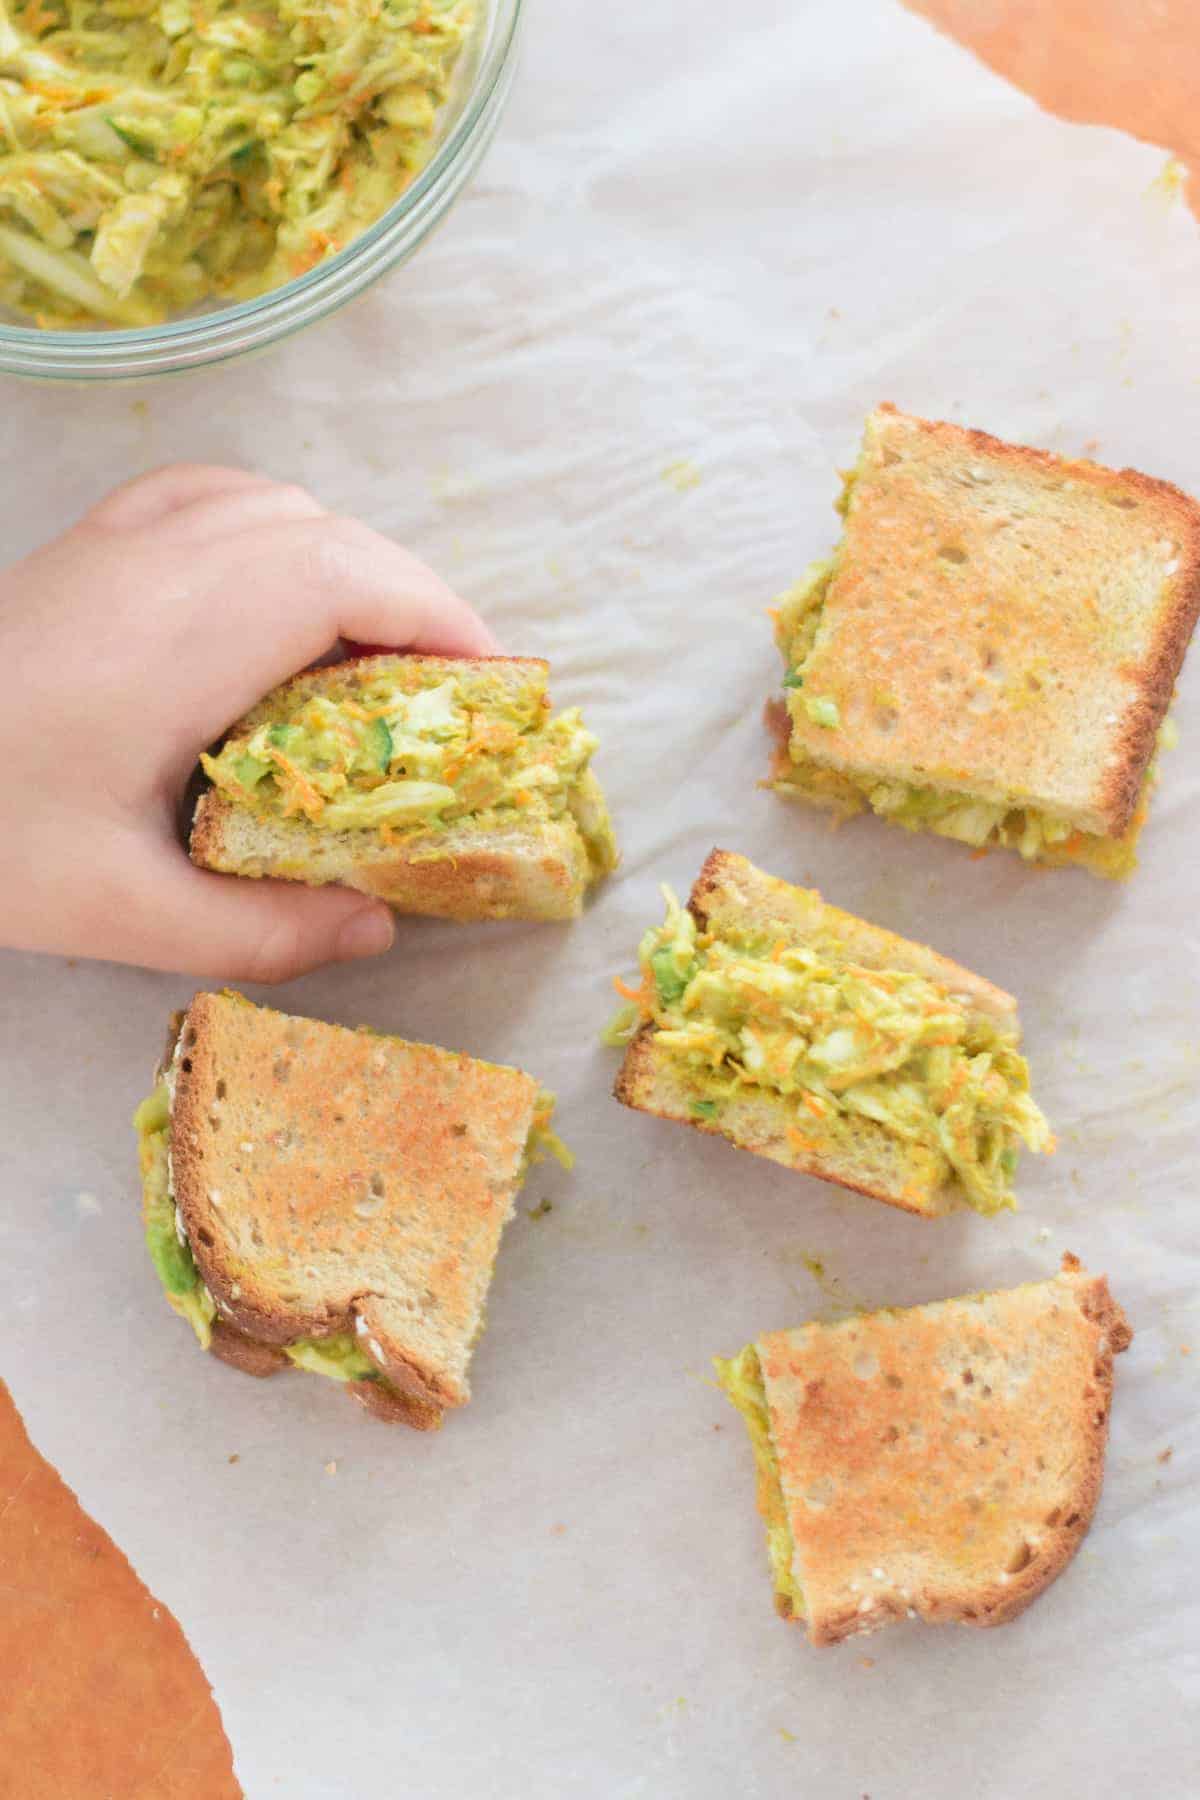 curry chicken avocado salad sliced into 5 small pieces with toddler's hand grabbing one